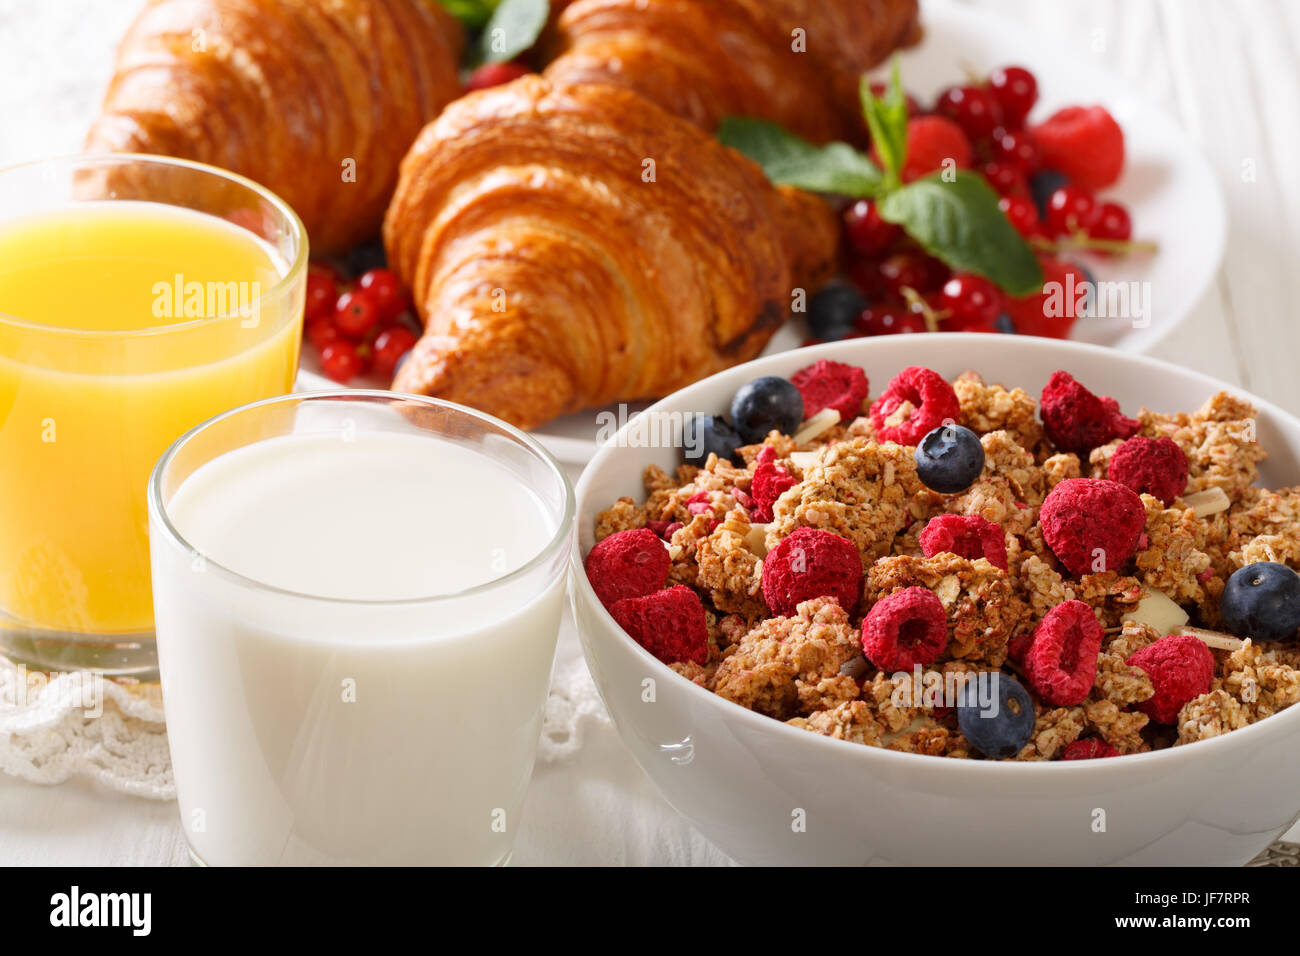 Delicious breakfast of granola with berries, as well as croissants, milk and orange juice close-up on the table. horizontal Stock Photo